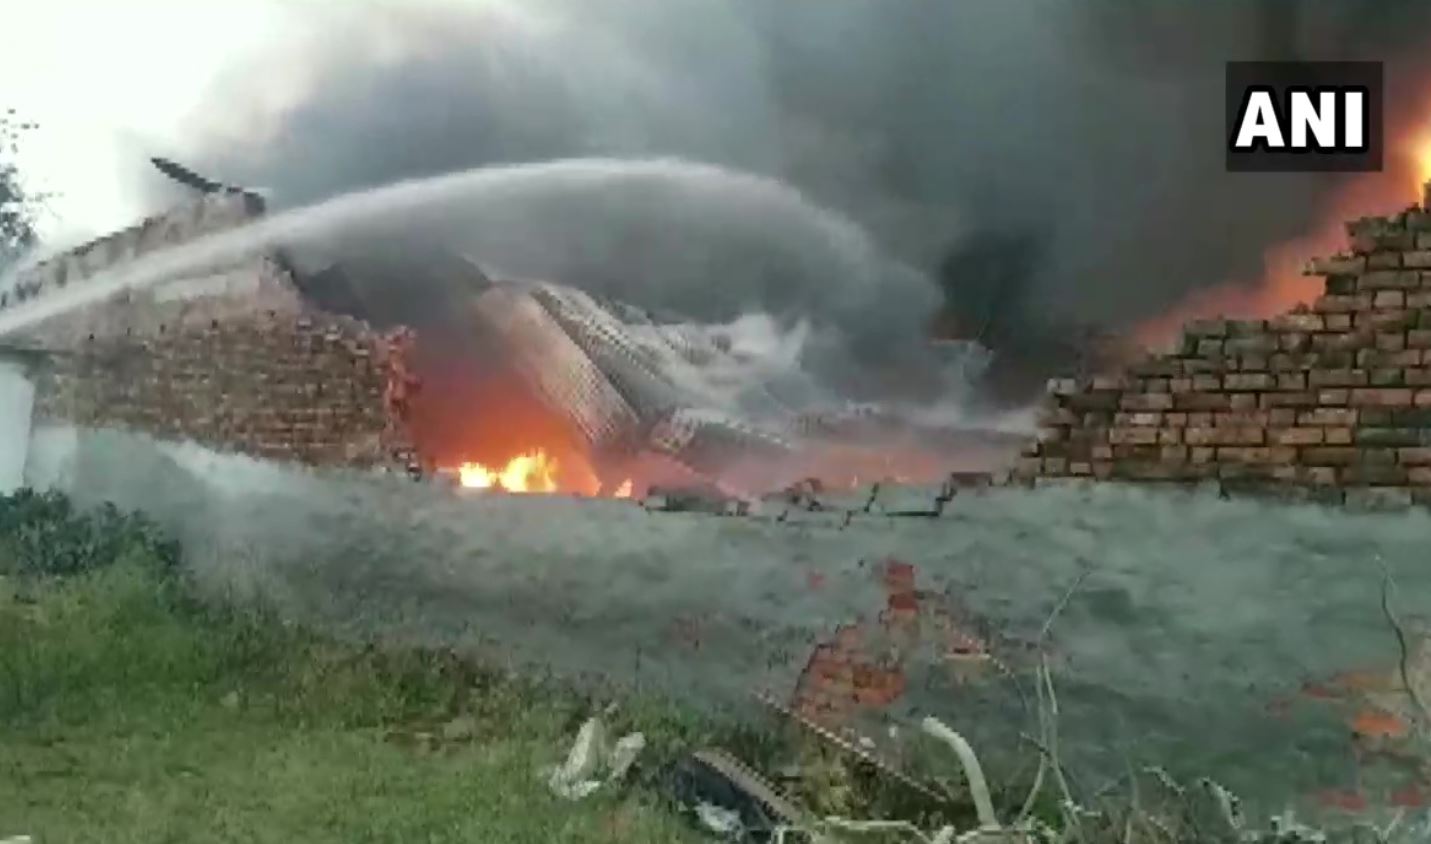 A huge fire broke out at a plastic godown in Chinhat area of Lucknow